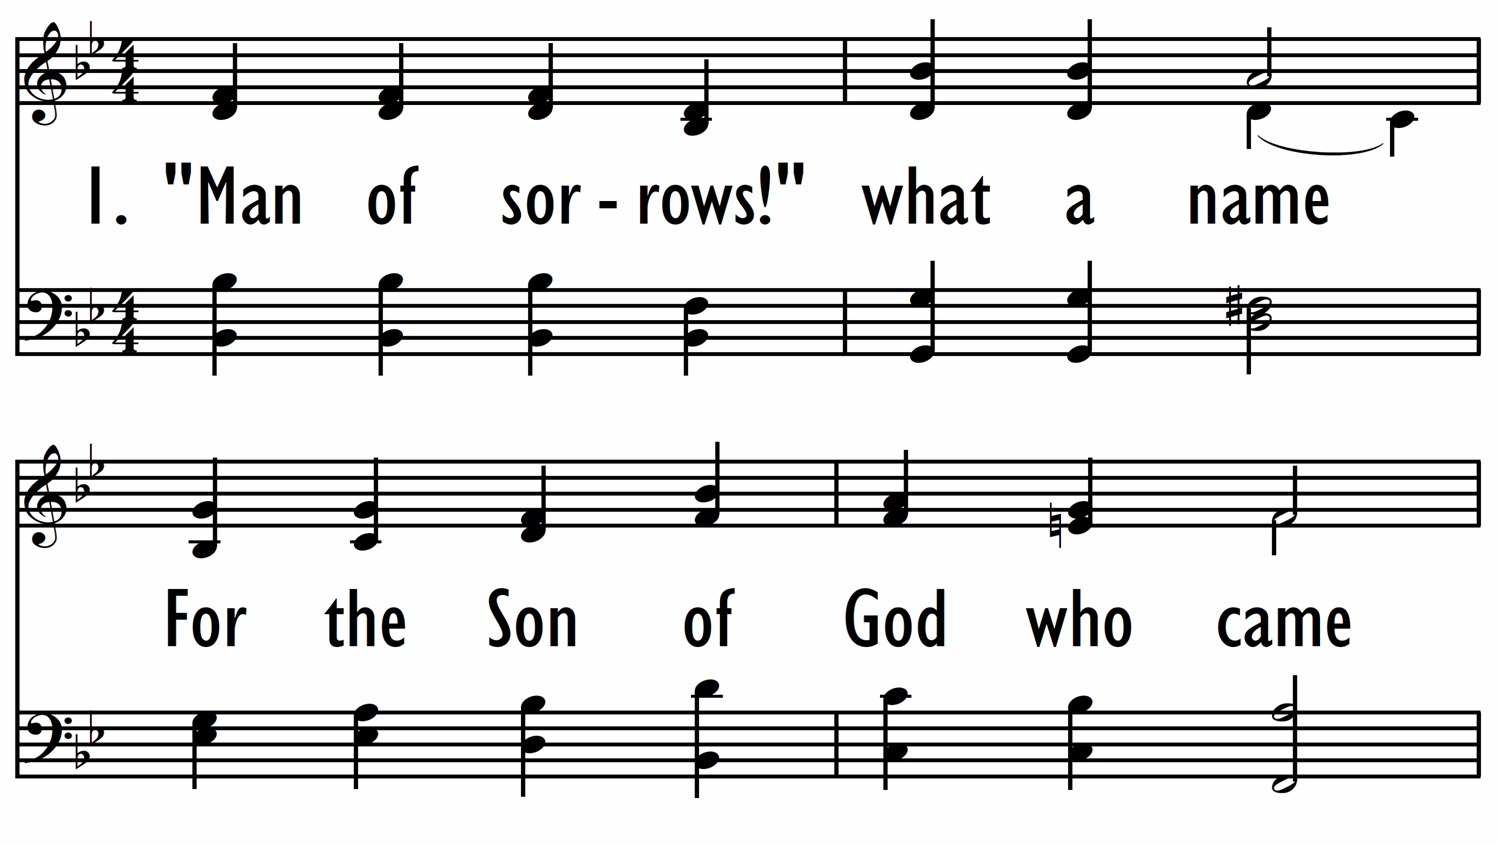 HALLELUJAH, WHAT A SAVIOR! - with descant and choral ending-ppt